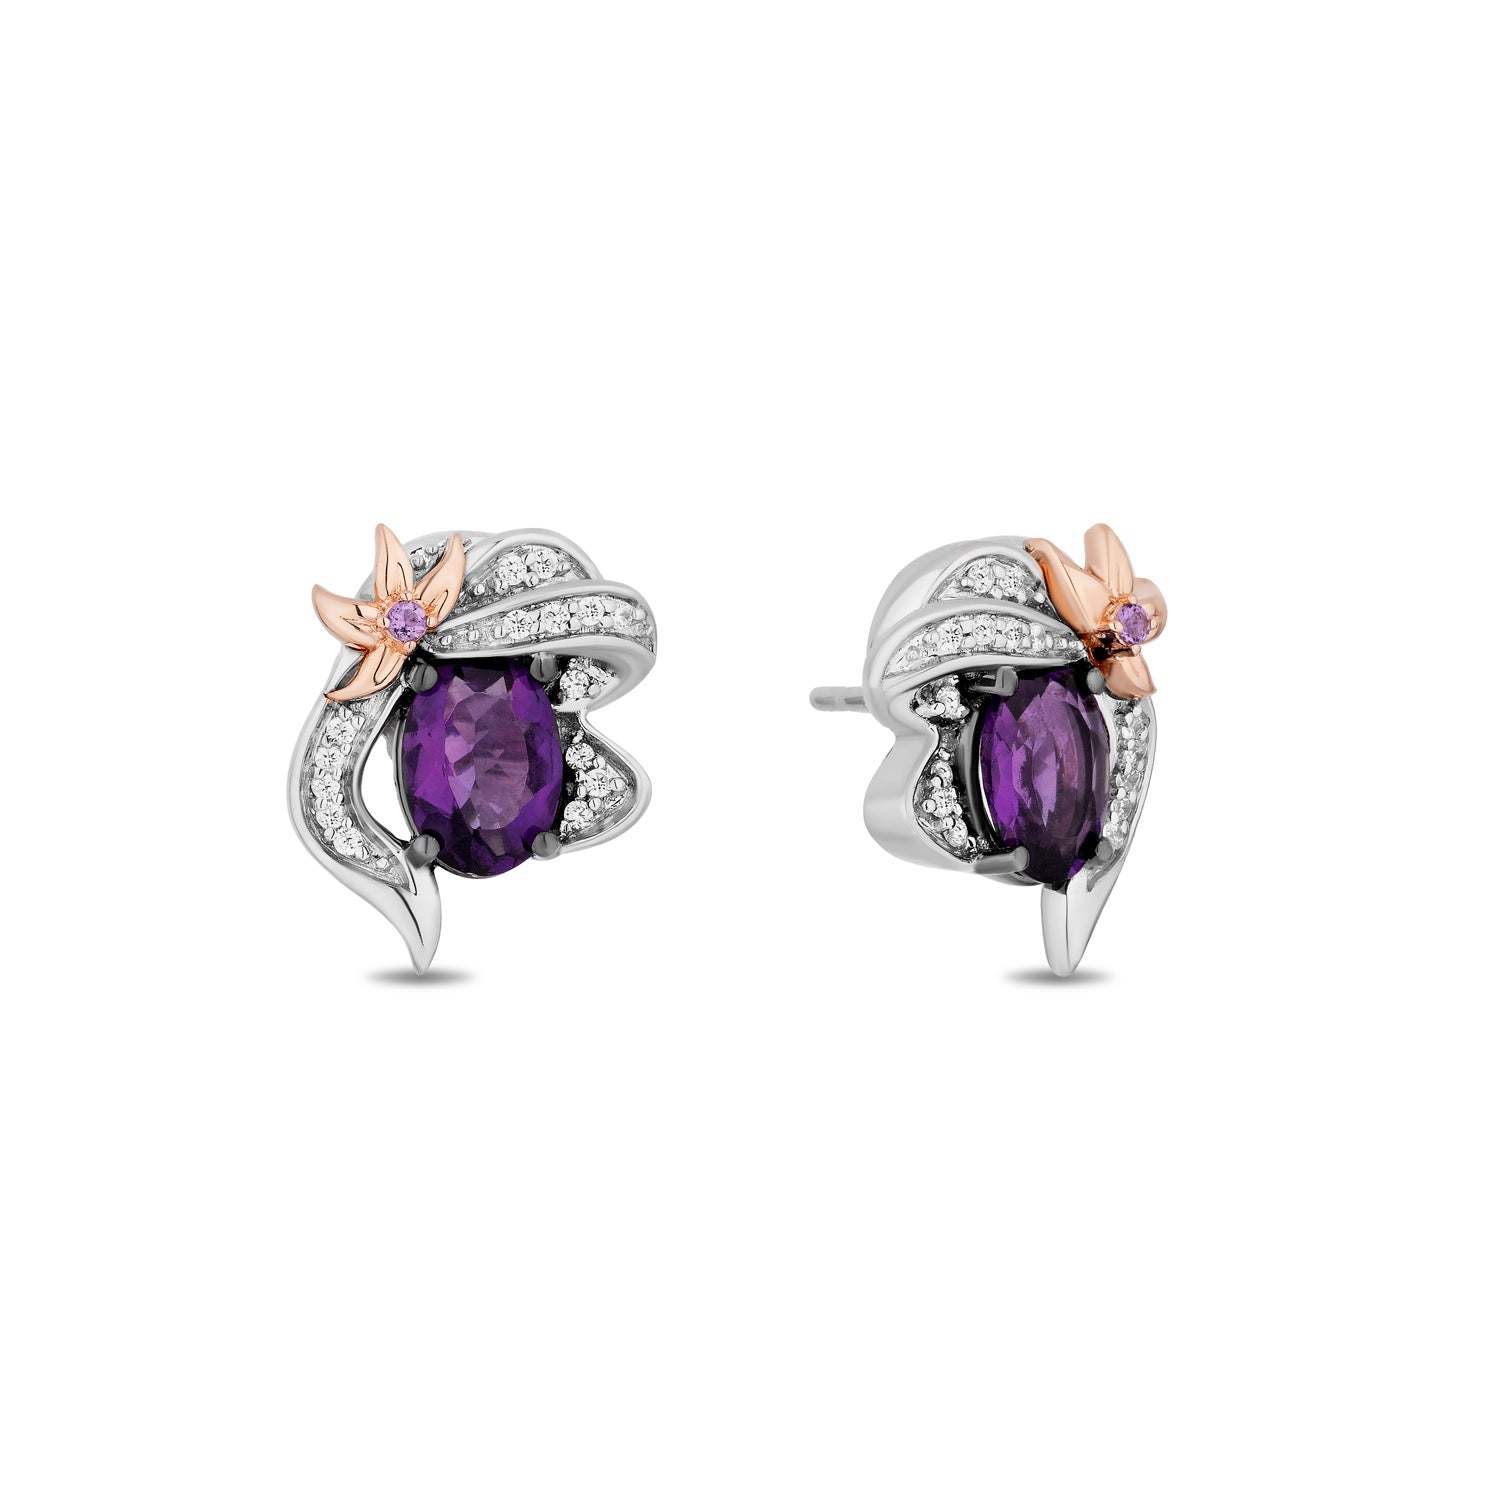 Disney Ariel Inspired White Diamond and Amethyst Stud Earrings in Black  Rhodium Over Sterling Silver and 10K Rose Gold 1/10 CTTW | Enchanted Disney  Fine Jewelry